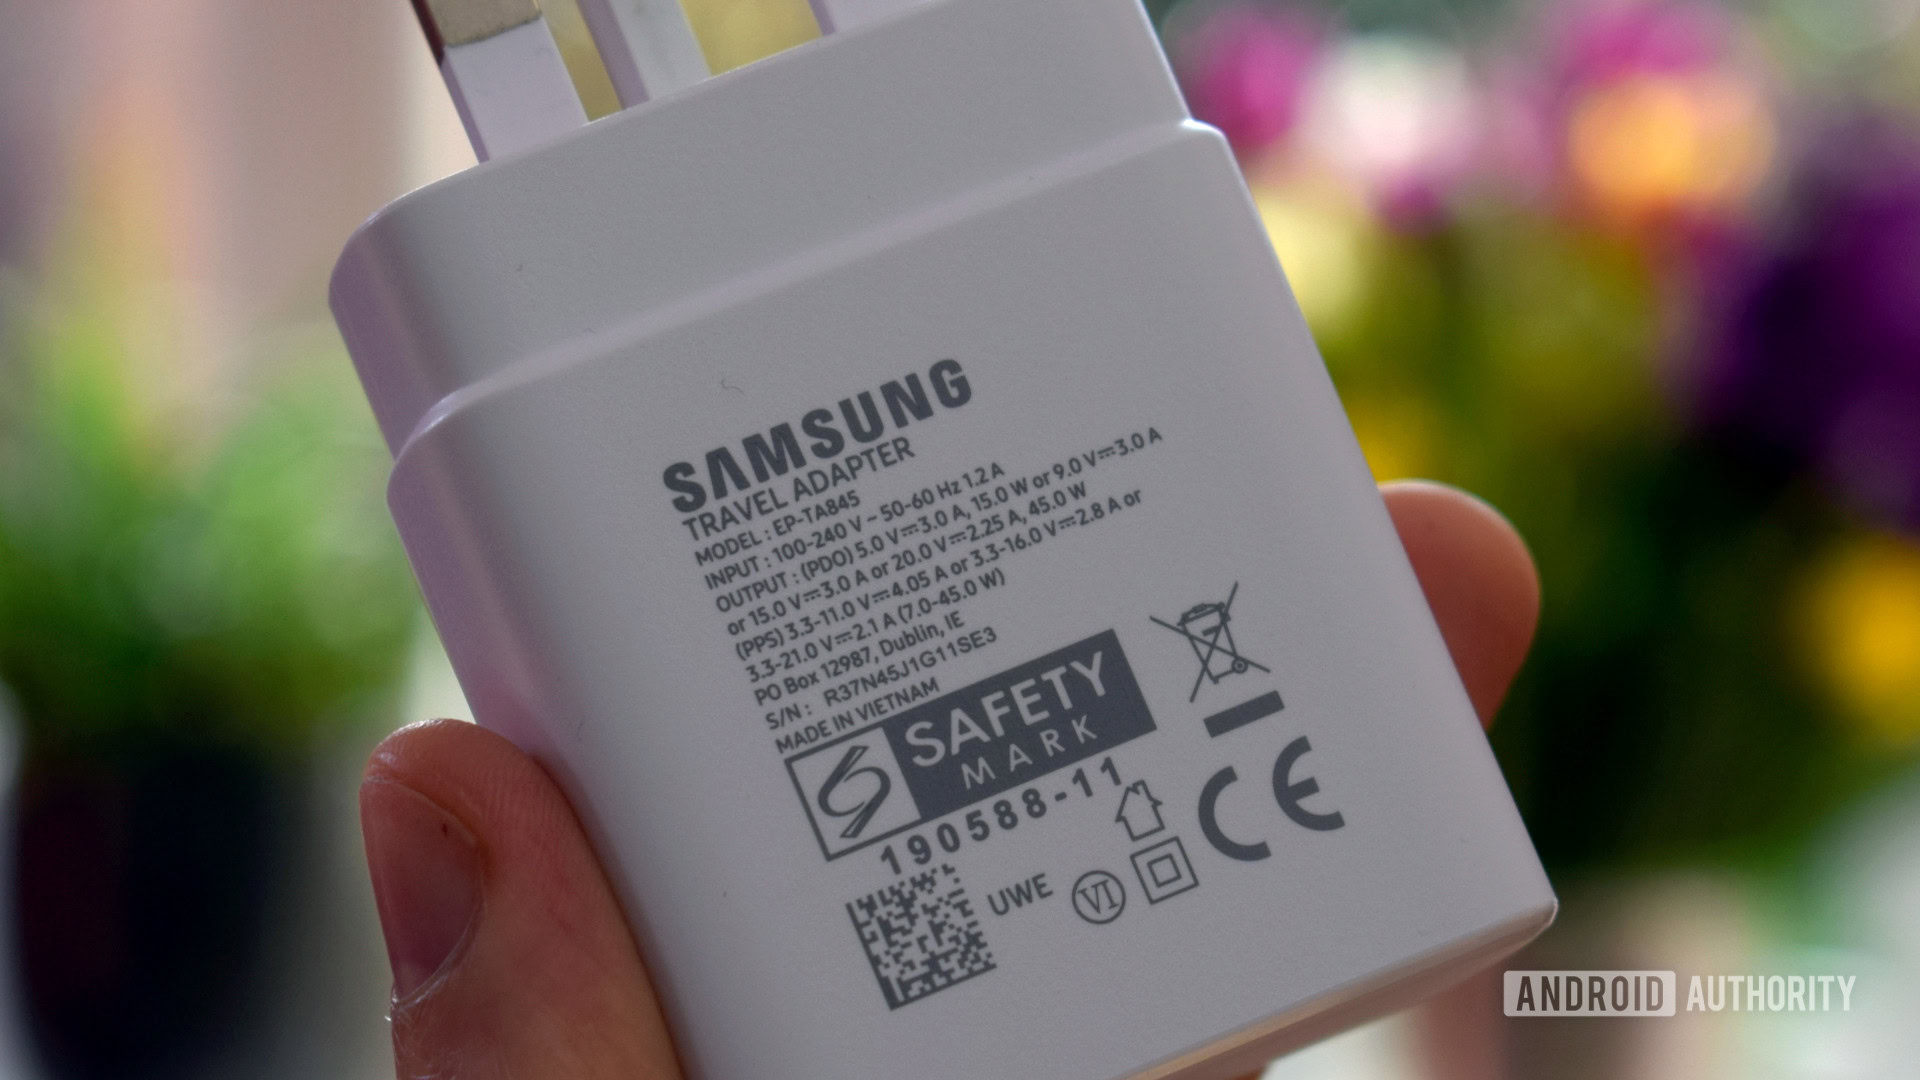 Samsung 45W Travel Adapter charging specs